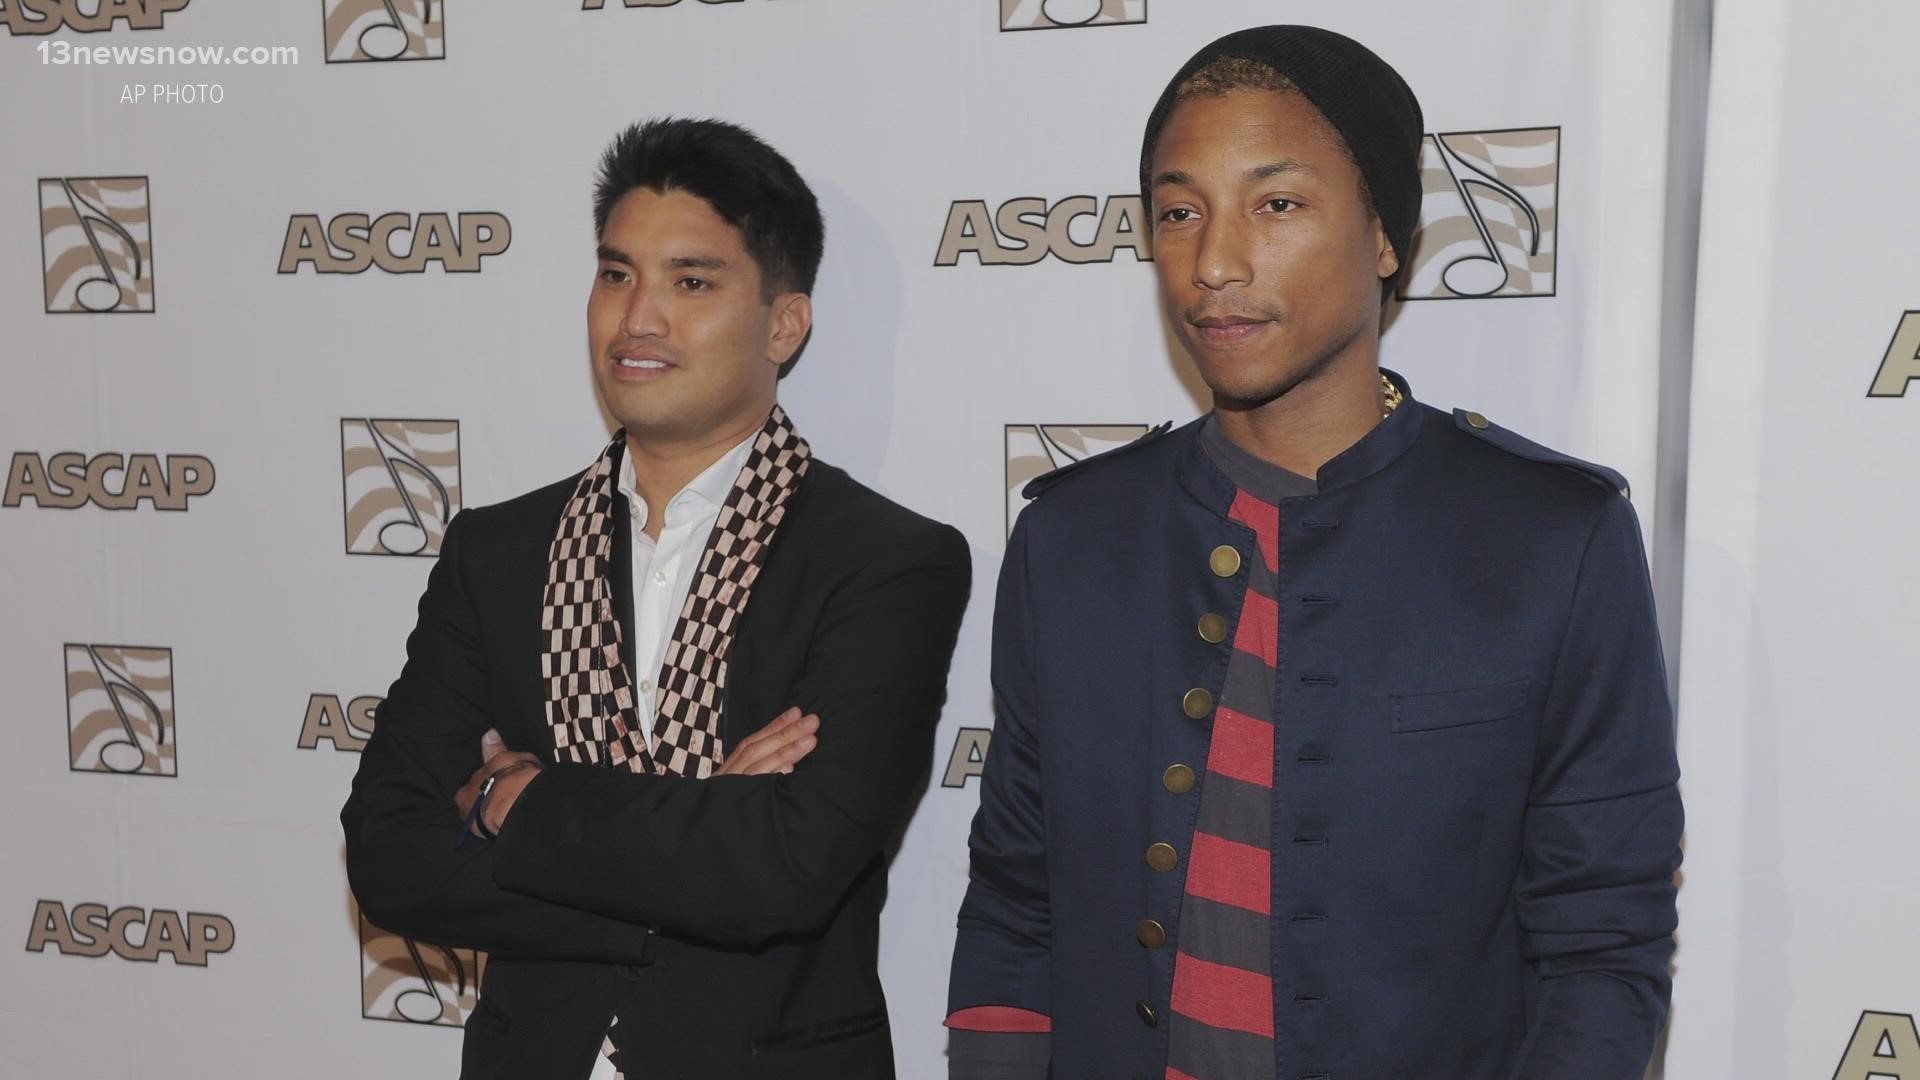 Chad Hugo and Pharrell Williams, who make up the iconic producing team The Neptunes, will be inducted into the Songwriters Hall of Fame on June 16.